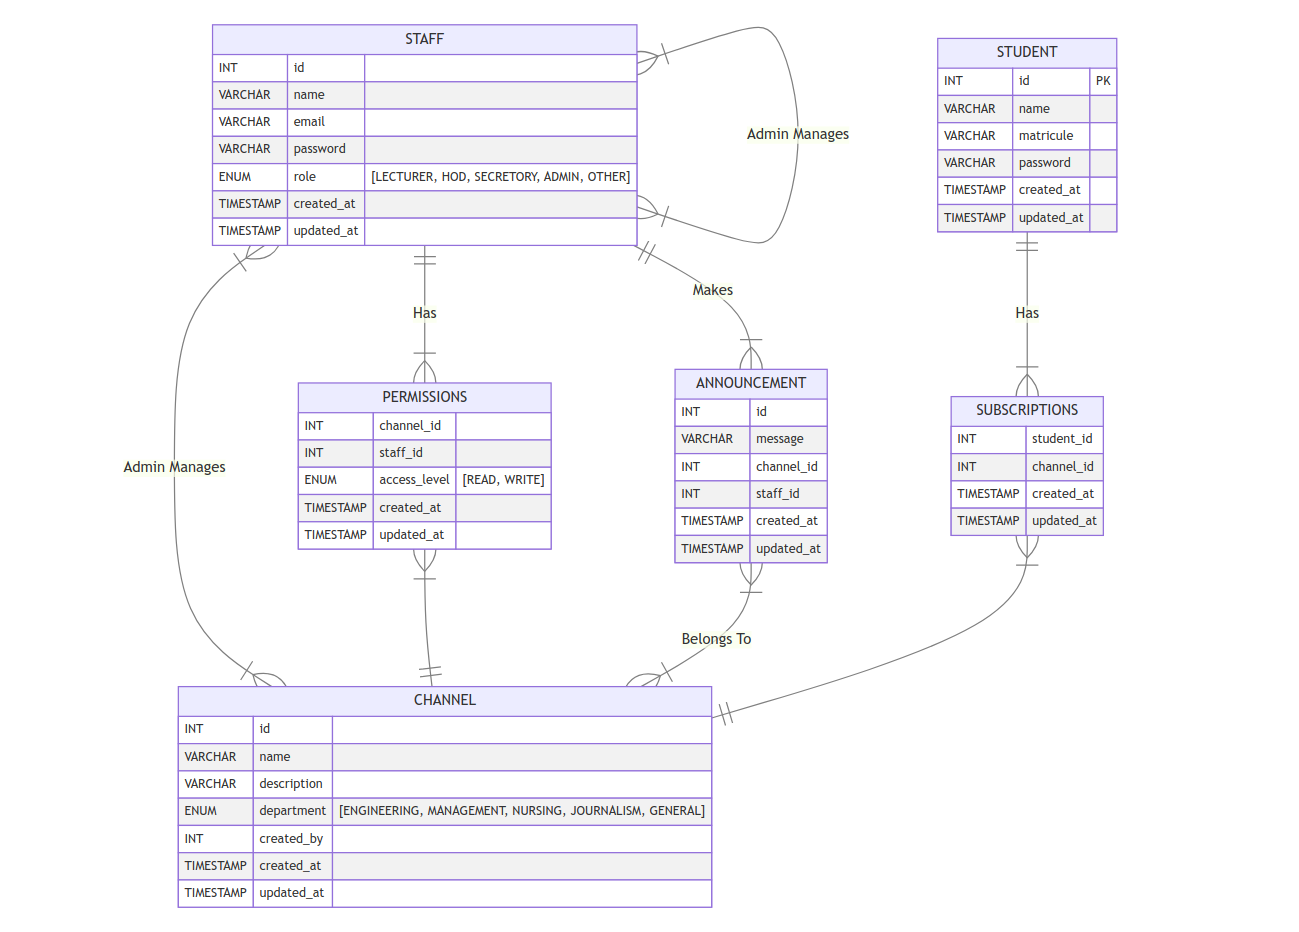 ERD (Entity Relationship Diagram) for centralized announcement platform generated with mermaid